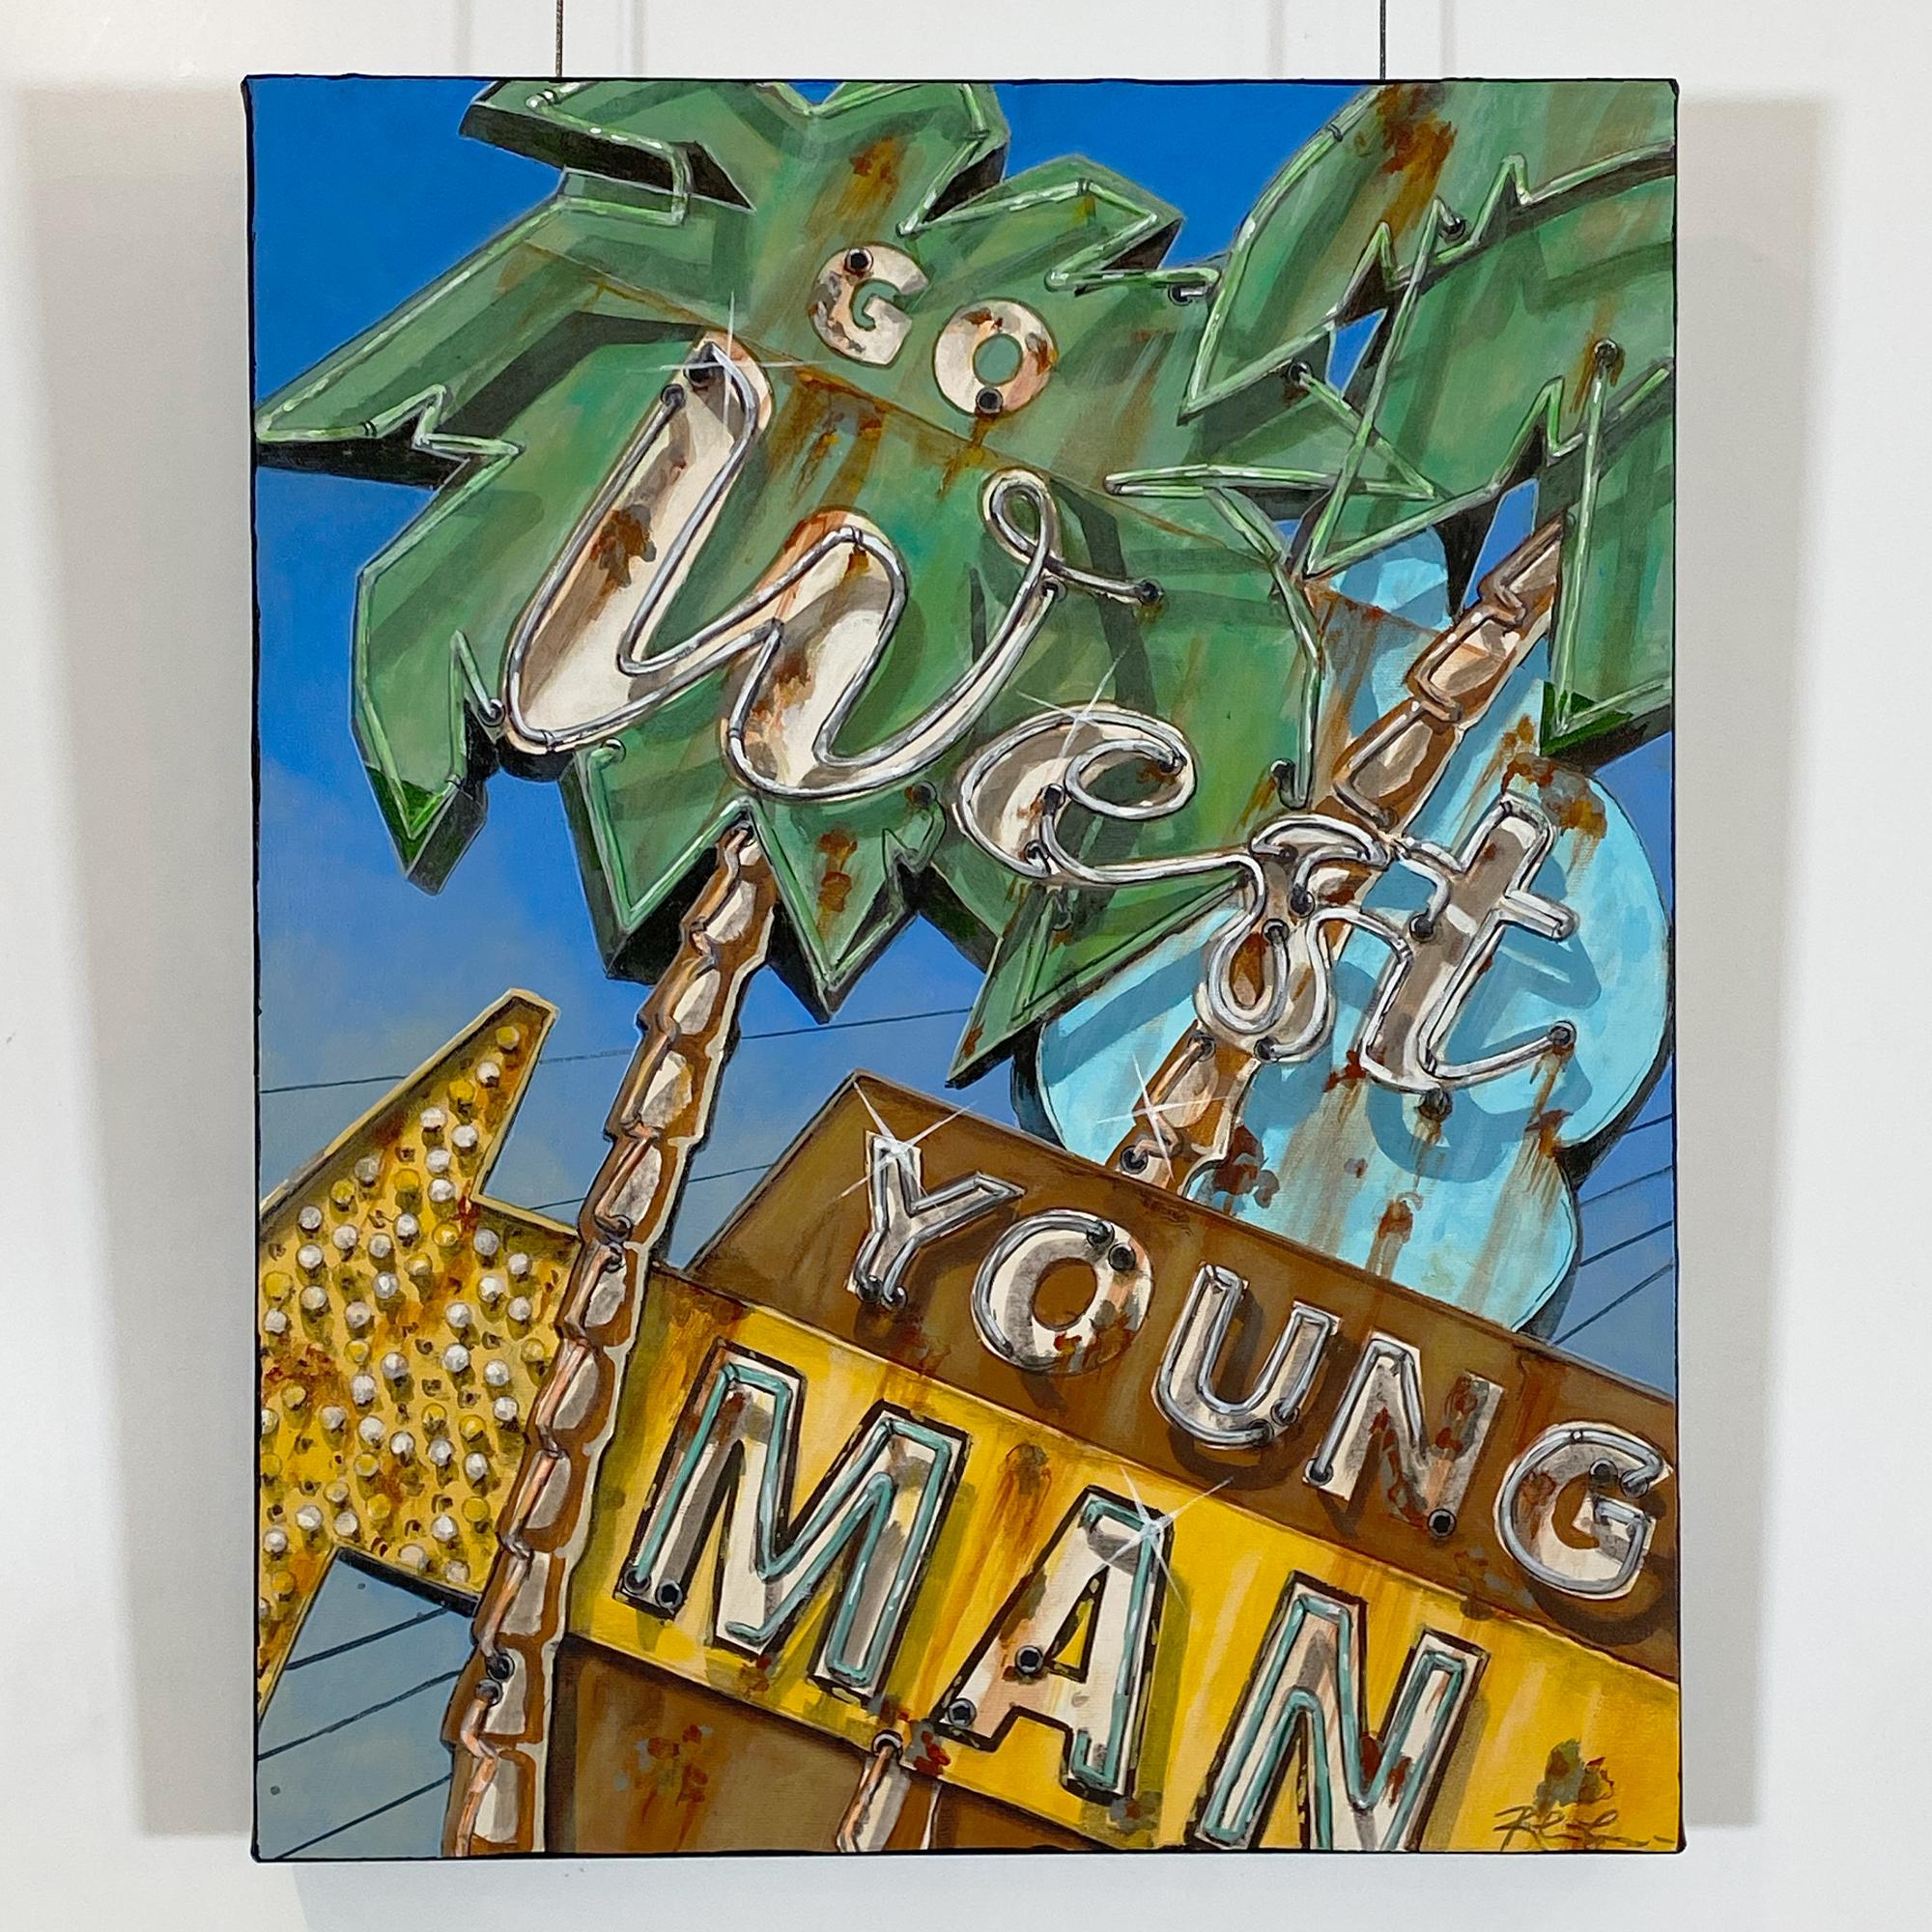 Go West (Young Man), neon sign movie inspired painting featuring palms - Painting by Rob Croxford